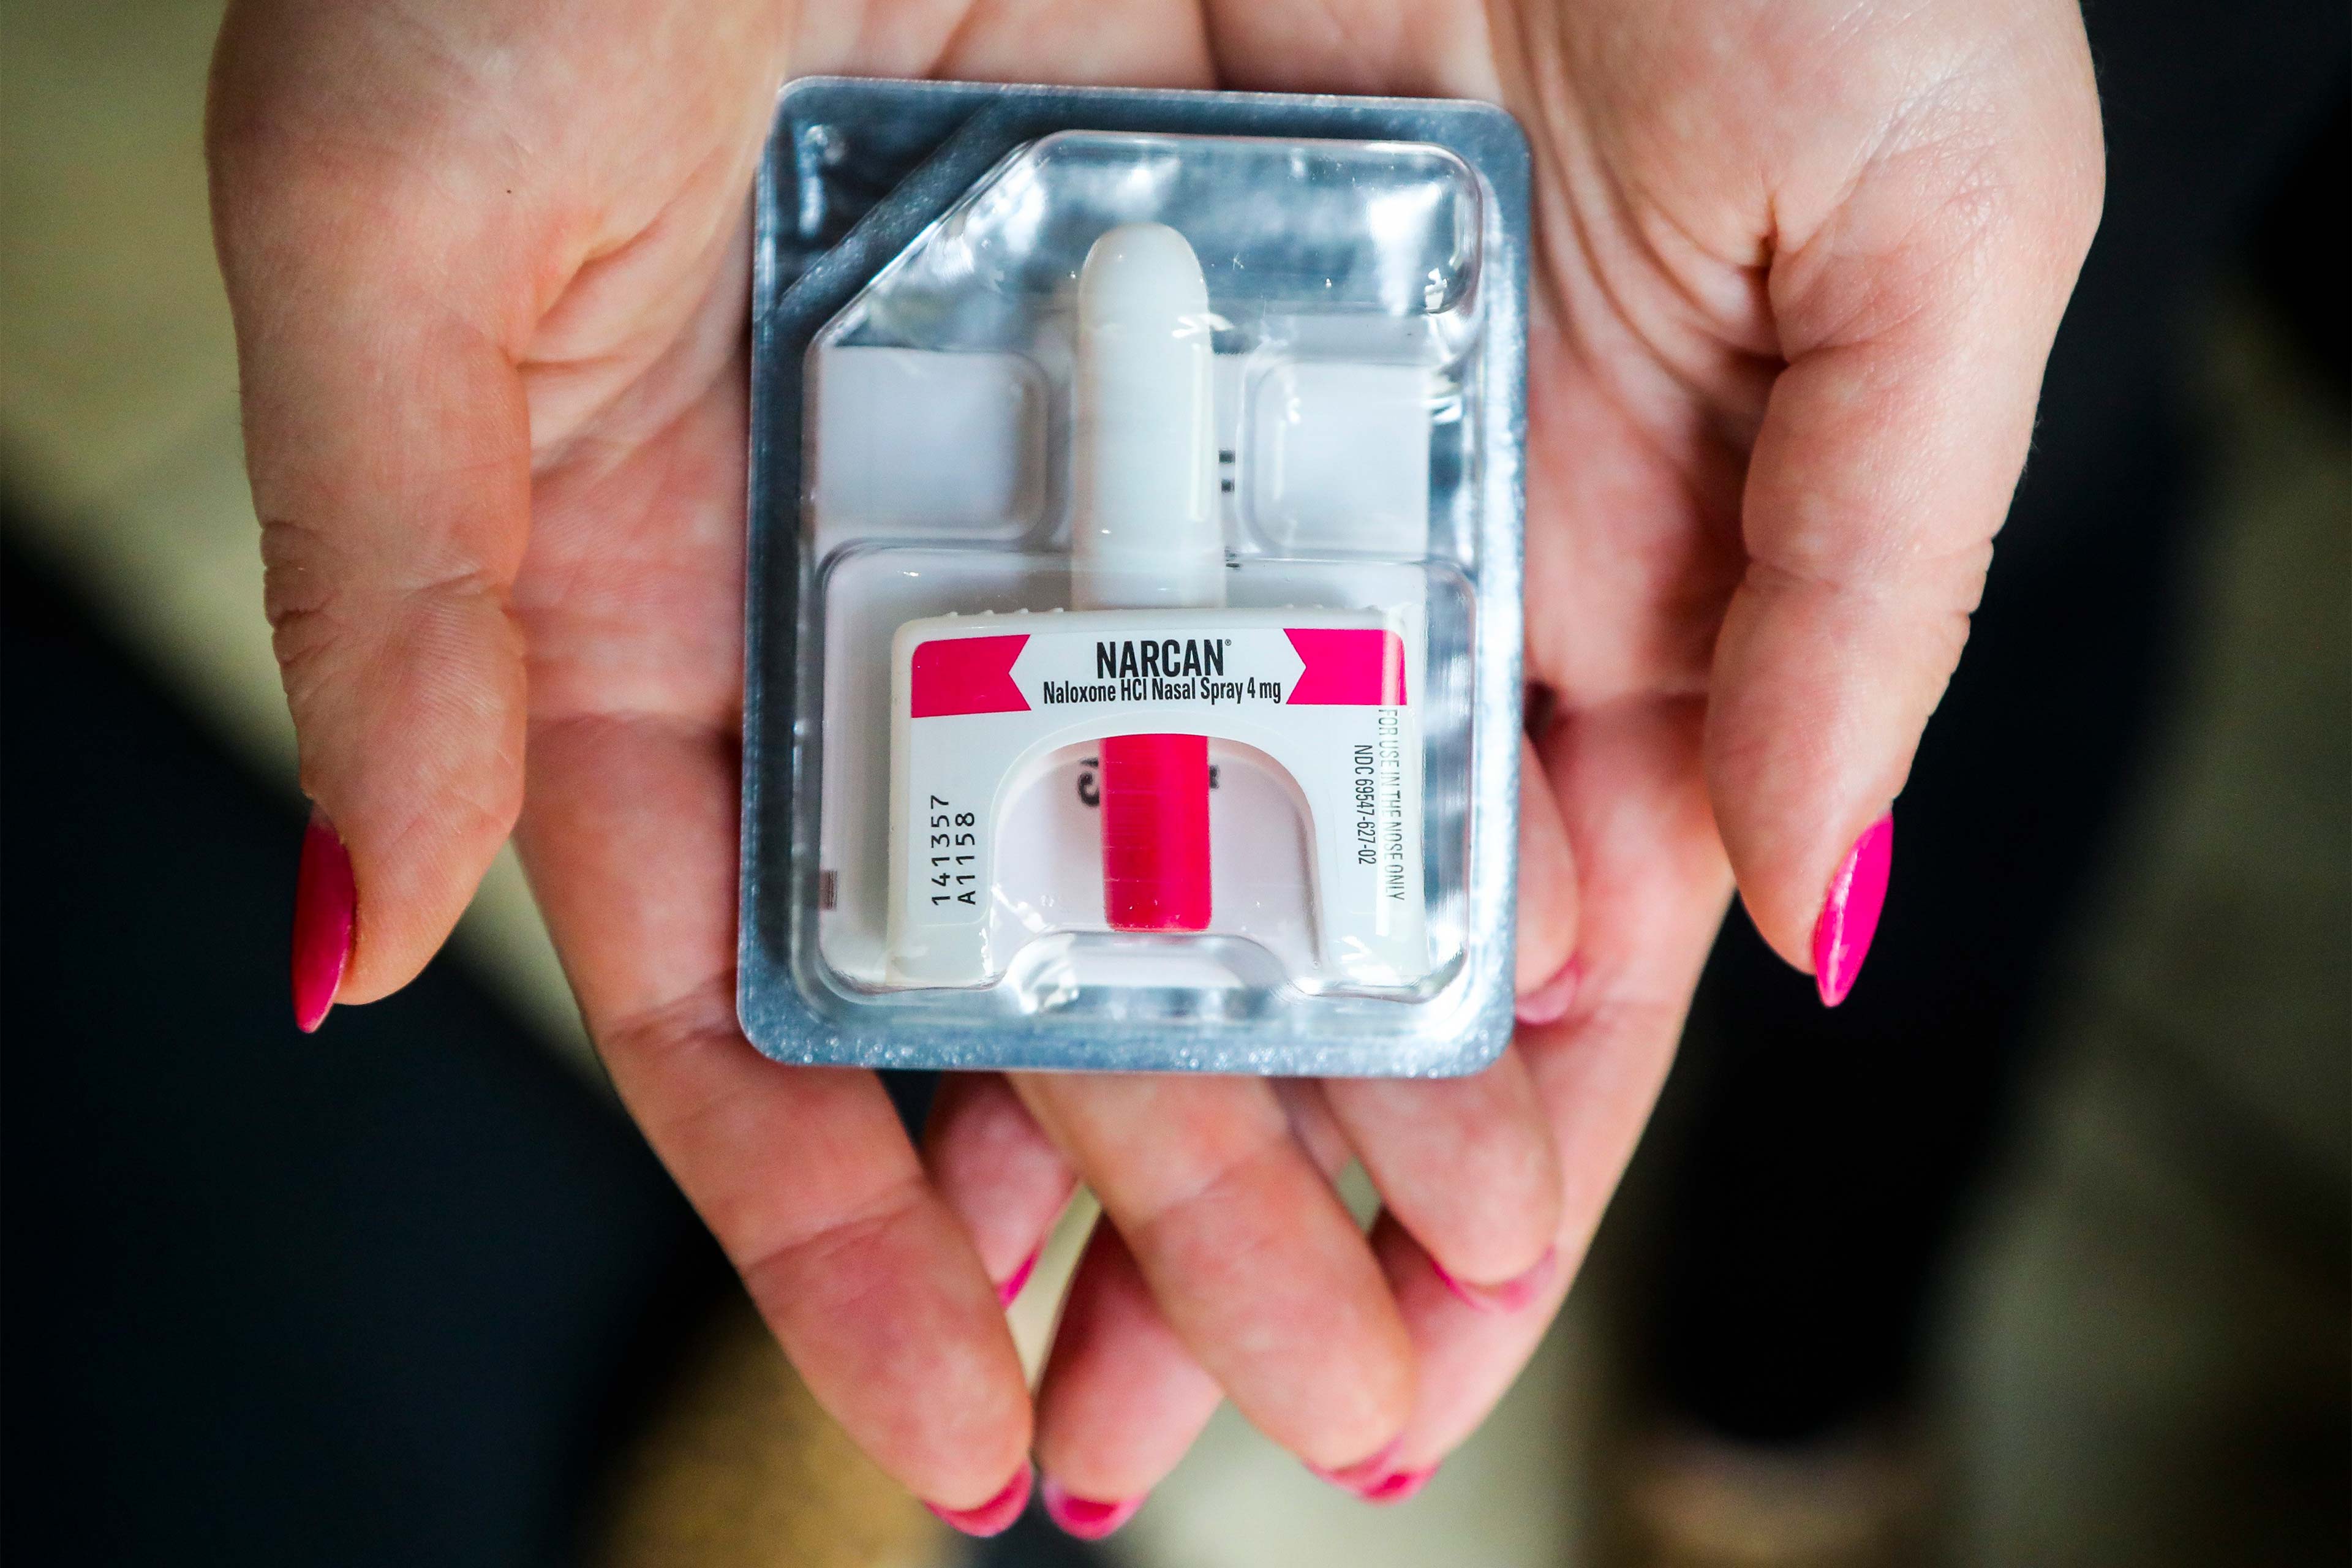 A photo of a woman's hands holding a package of Narcan.